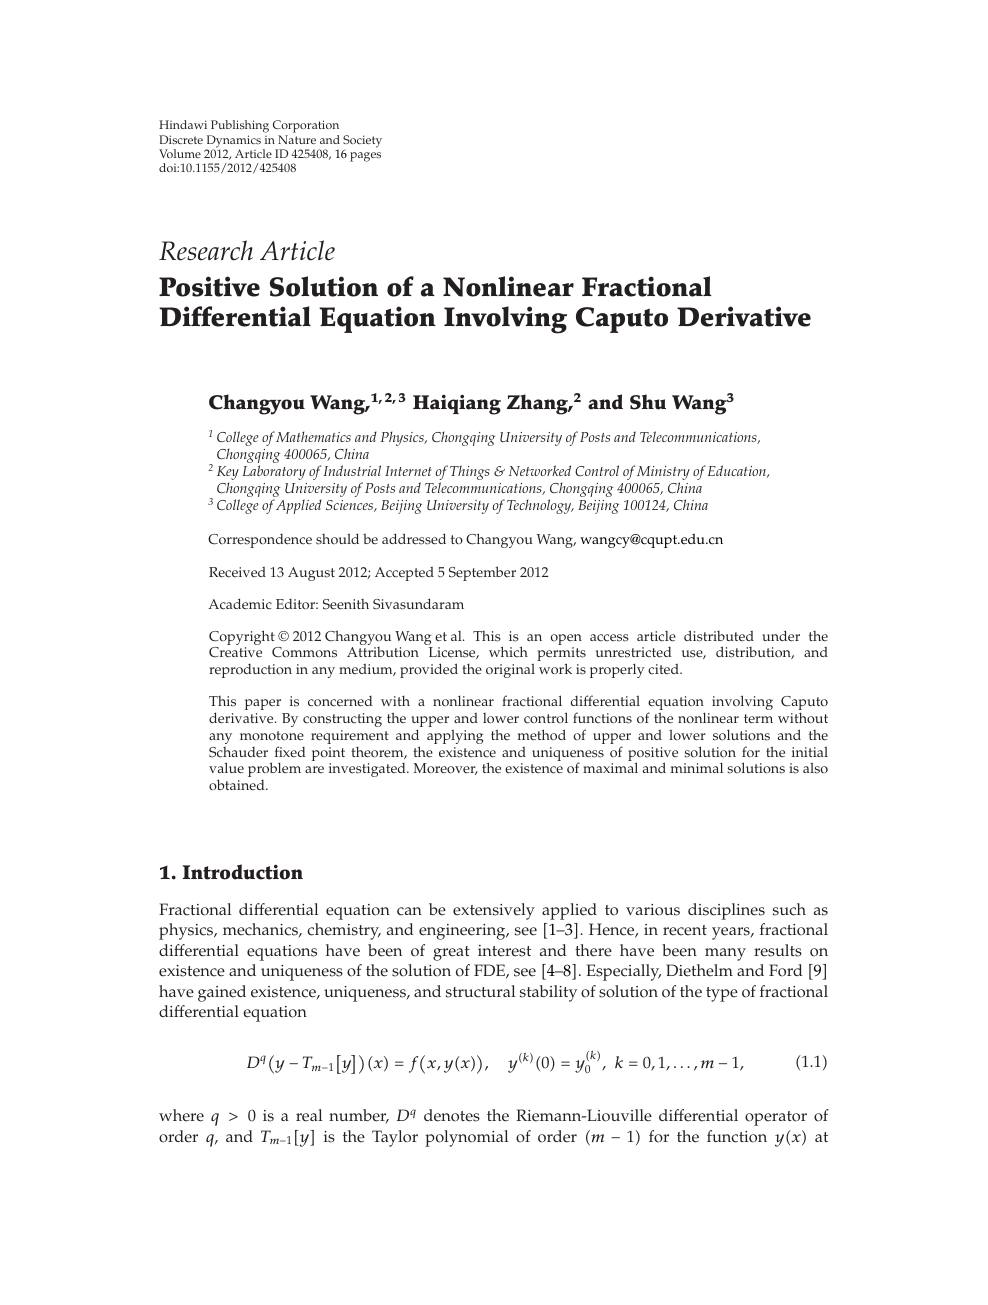 Positive Solution Of A Nonlinear Fractional Differential Equation Involving Caputo Derivative Topic Of Research Paper In Mathematics Download Scholarly Article Pdf And Read For Free On Cyberleninka Open Science Hub